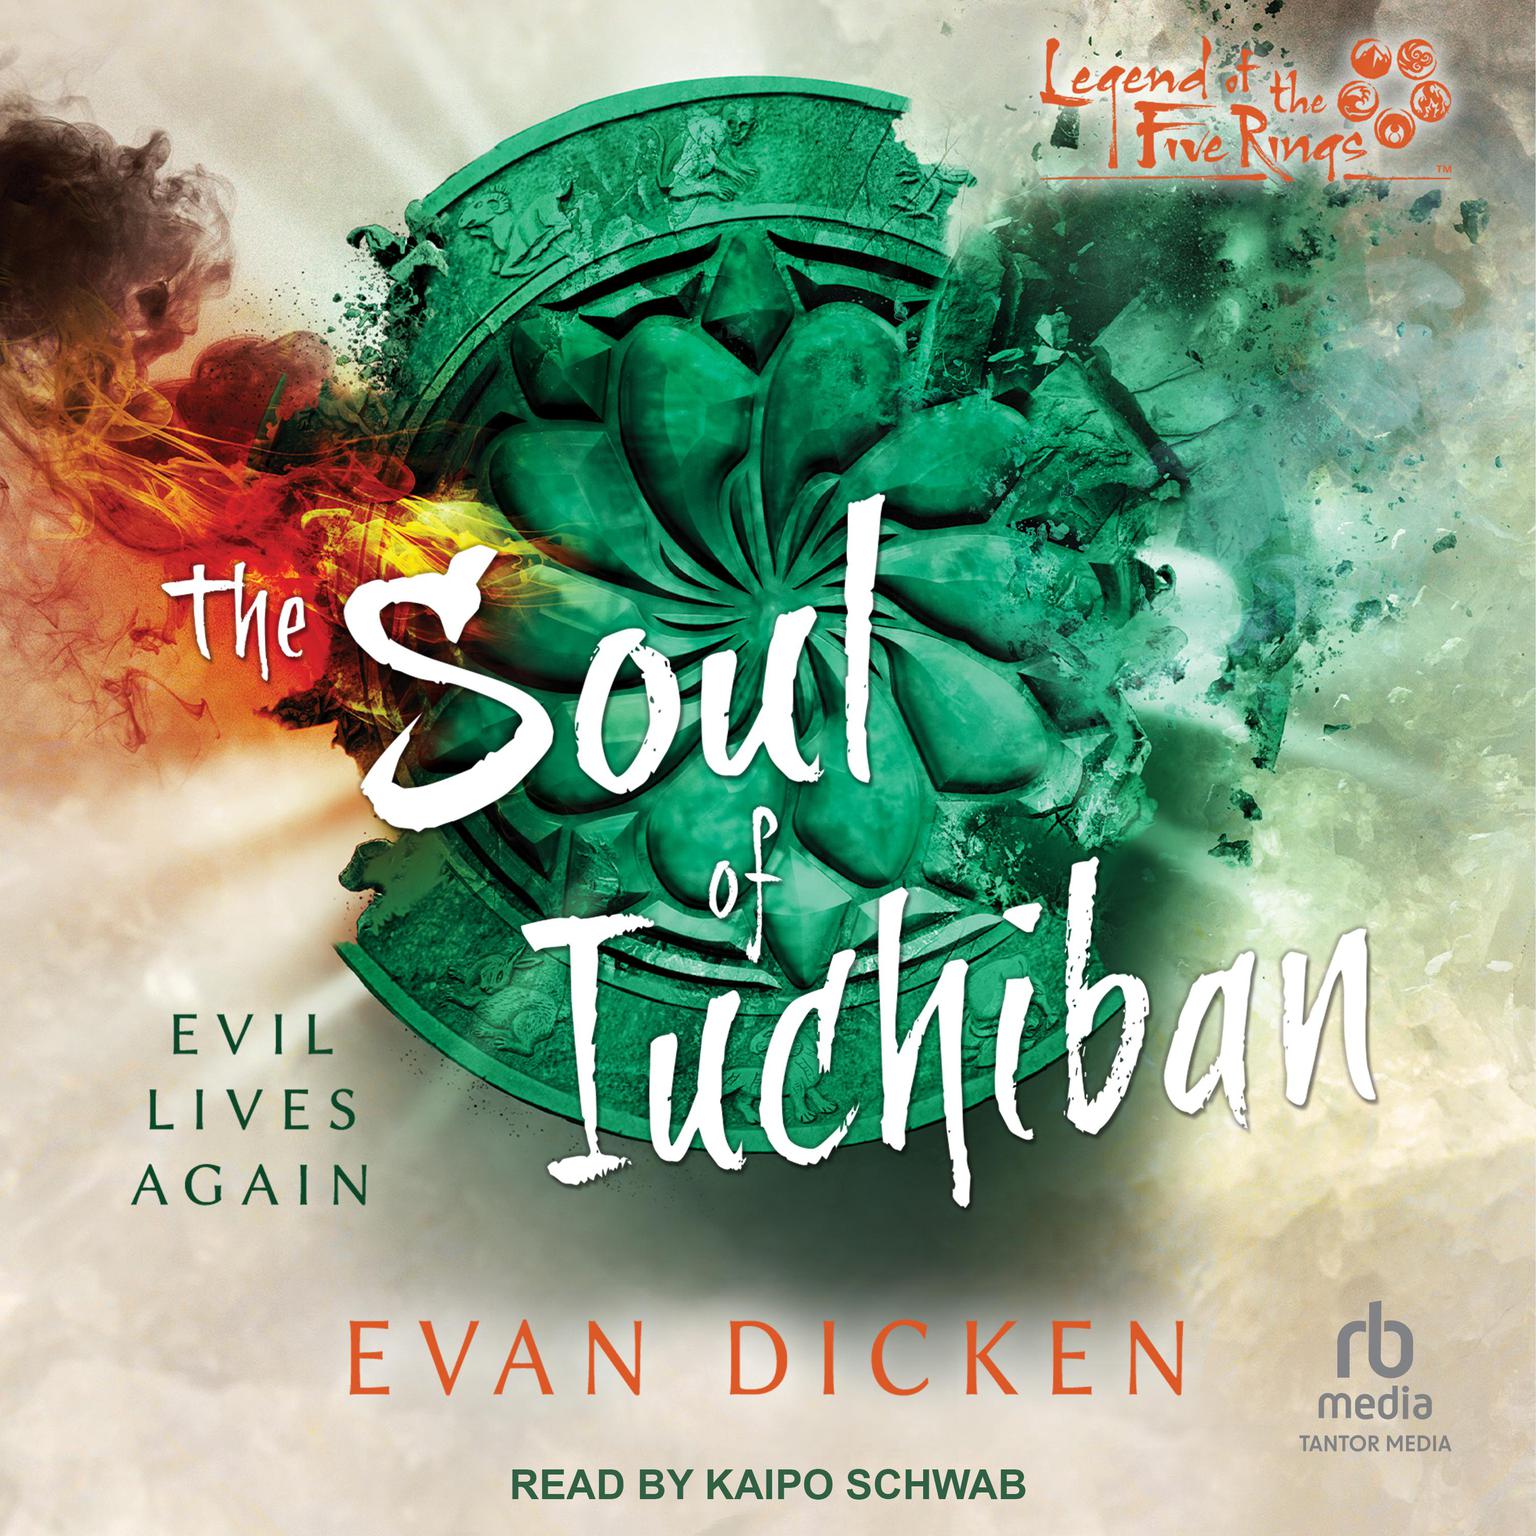 The Soul of Iuchiban: A Legend of the Five Rings Novel Audiobook, by Evan Dicken